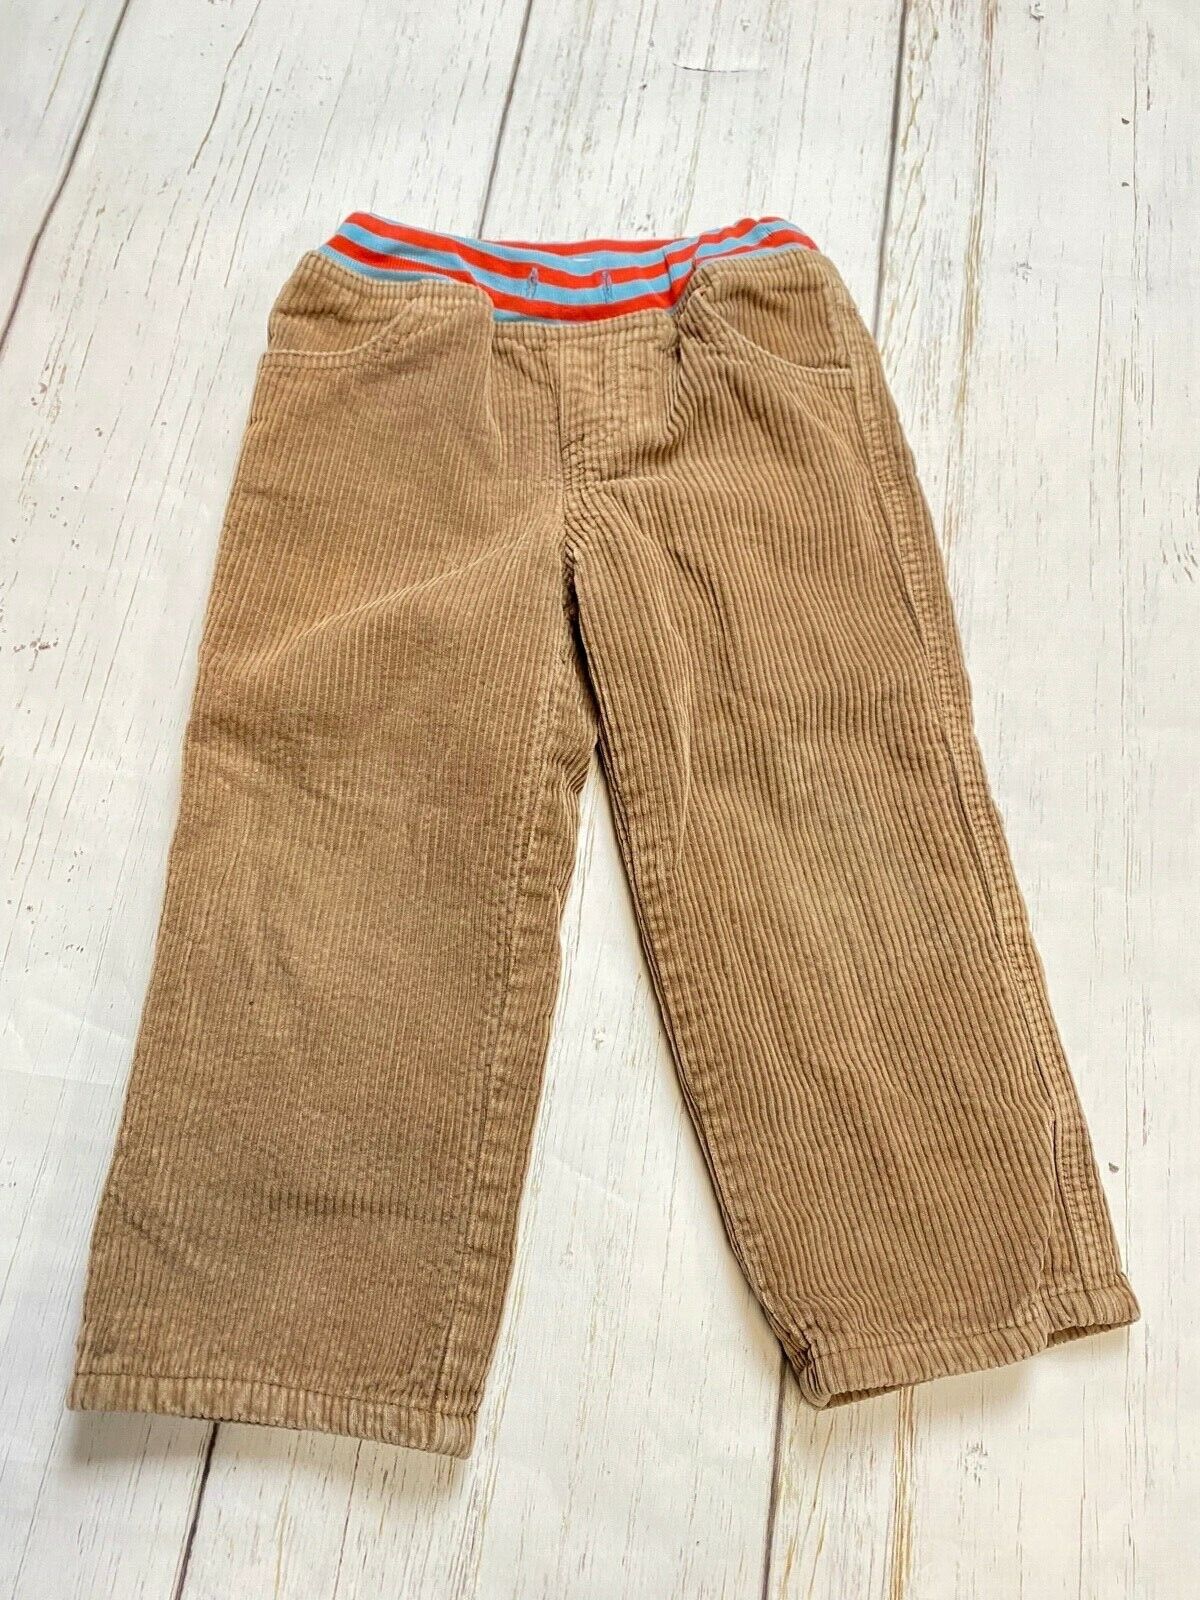 Baby Boden Boy Jersey Lined Corduroy Pull On Pants Brown 2-3 Yrs